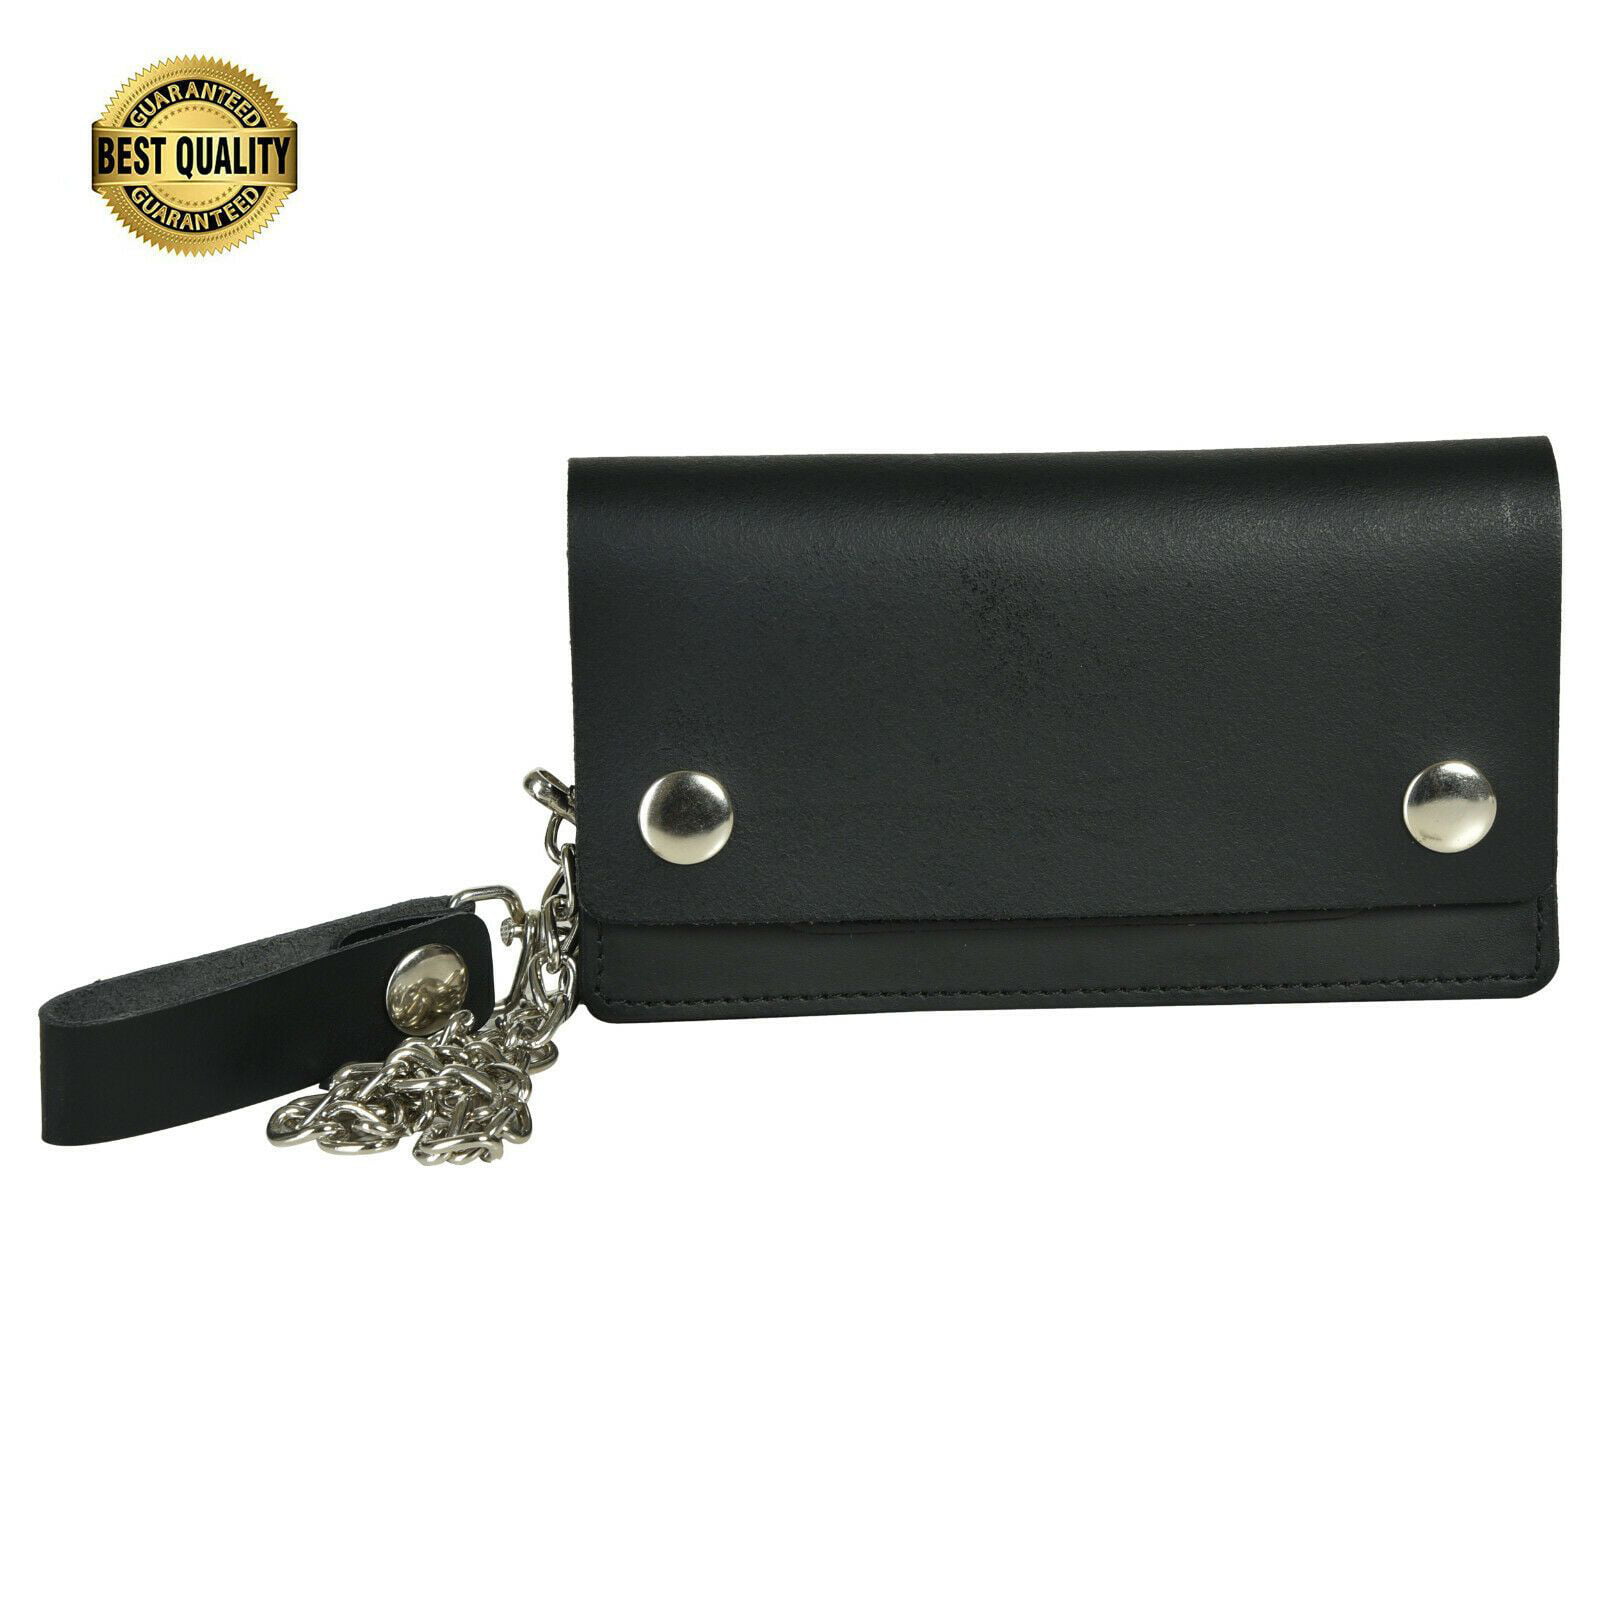 Mens Soft Leather Biker Chain Wallet RFID Proof Black Security Anti Theft Chain 